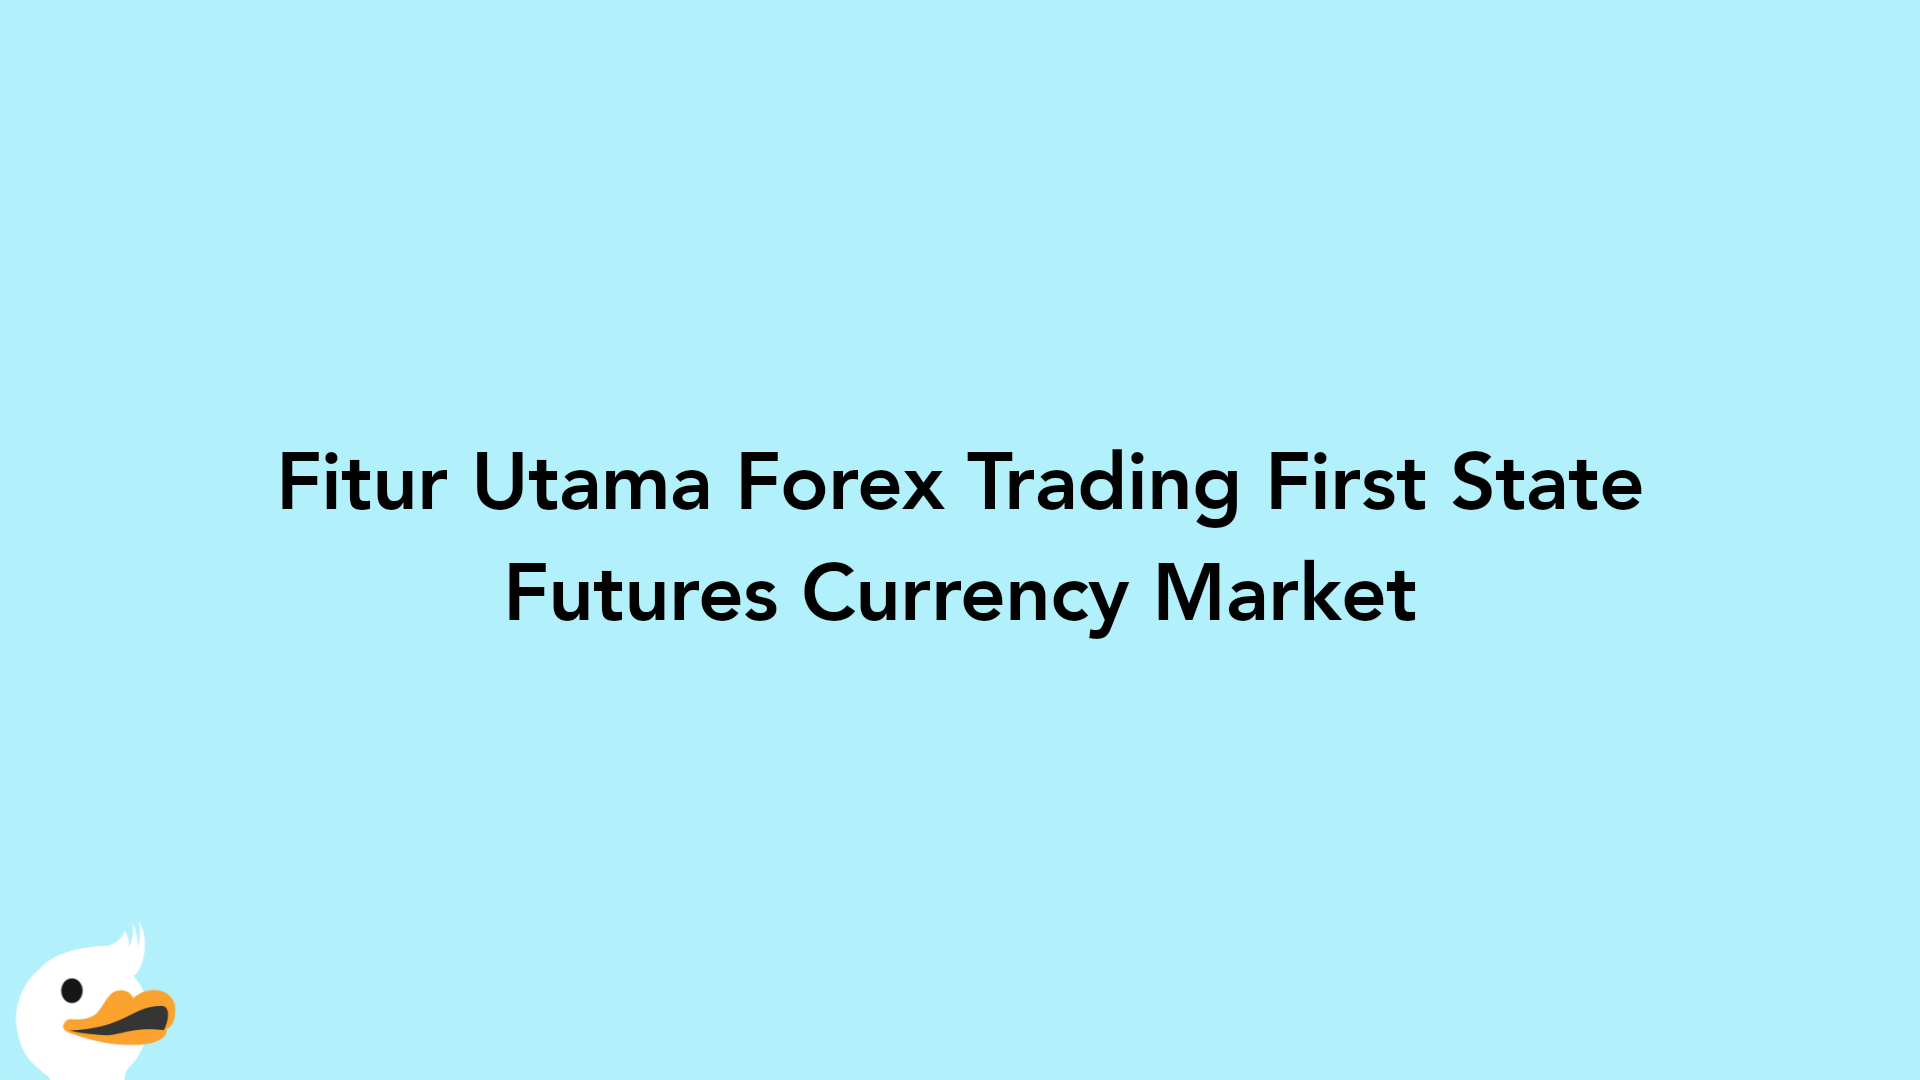 Fitur Utama Forex Trading First State Futures Currency Market